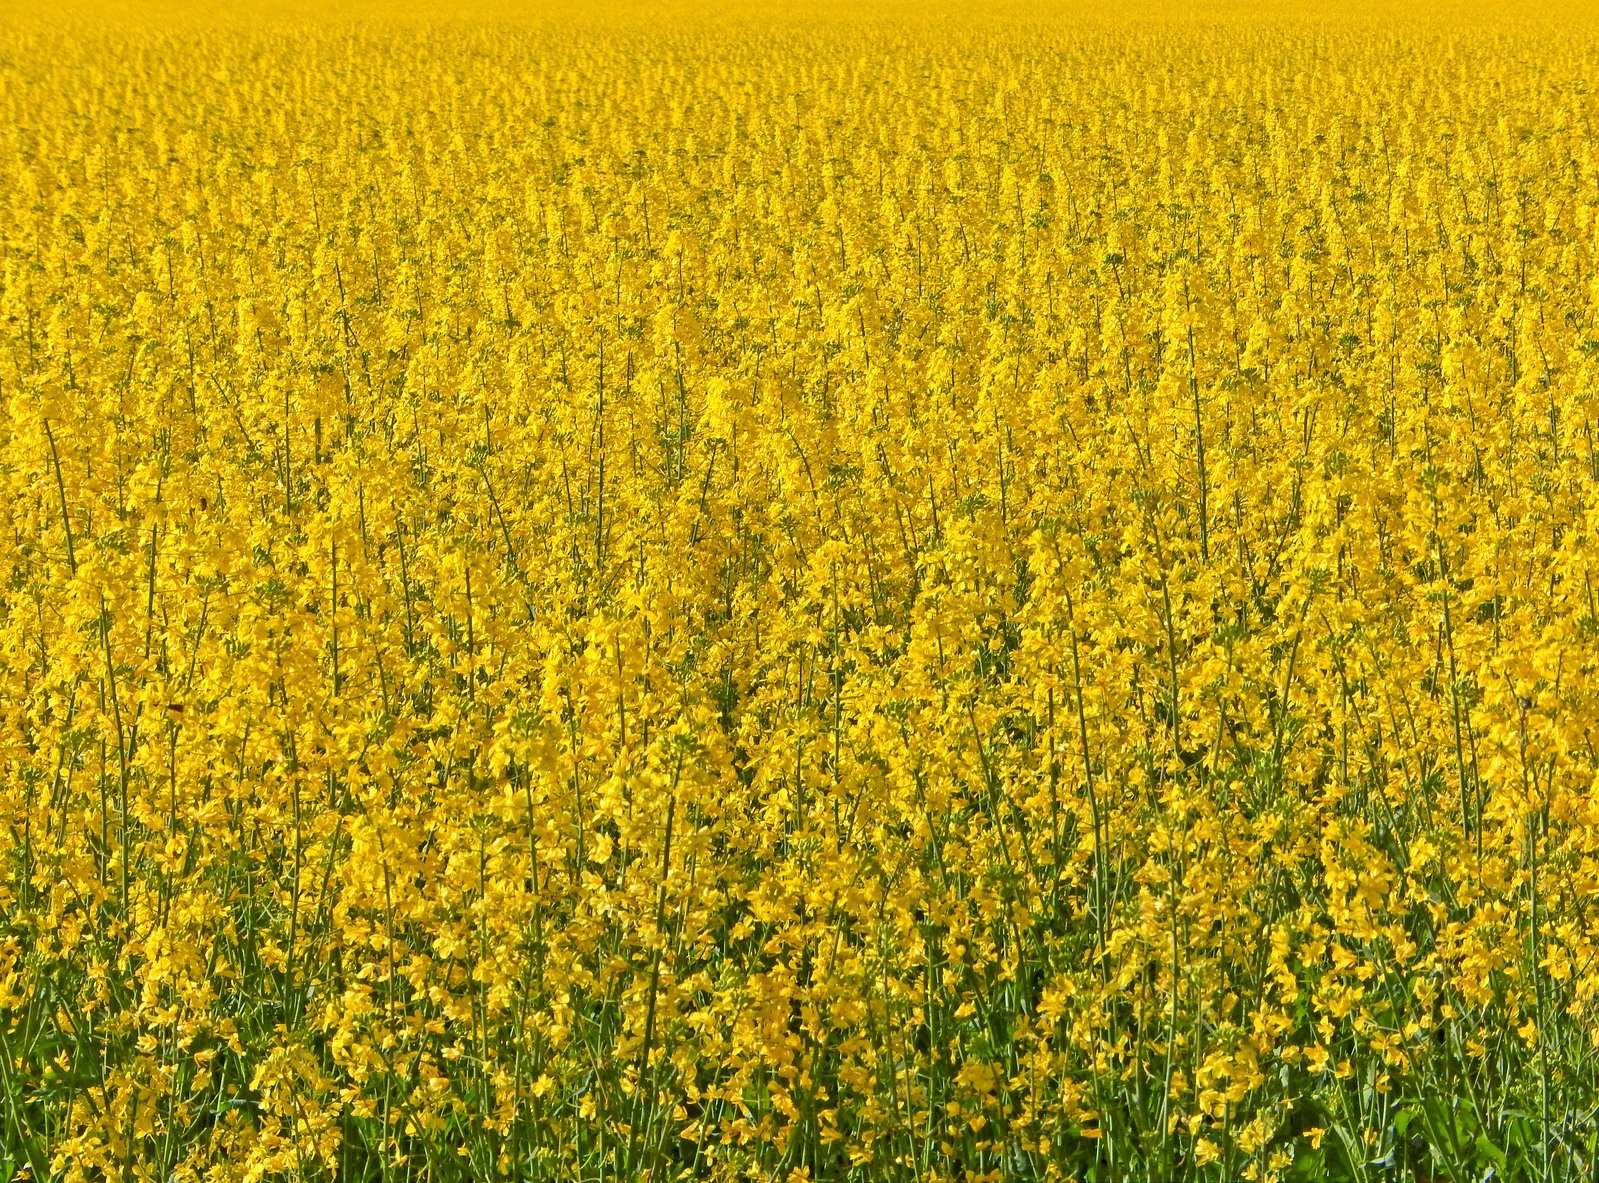 a field with very yellow flowers in the foreground